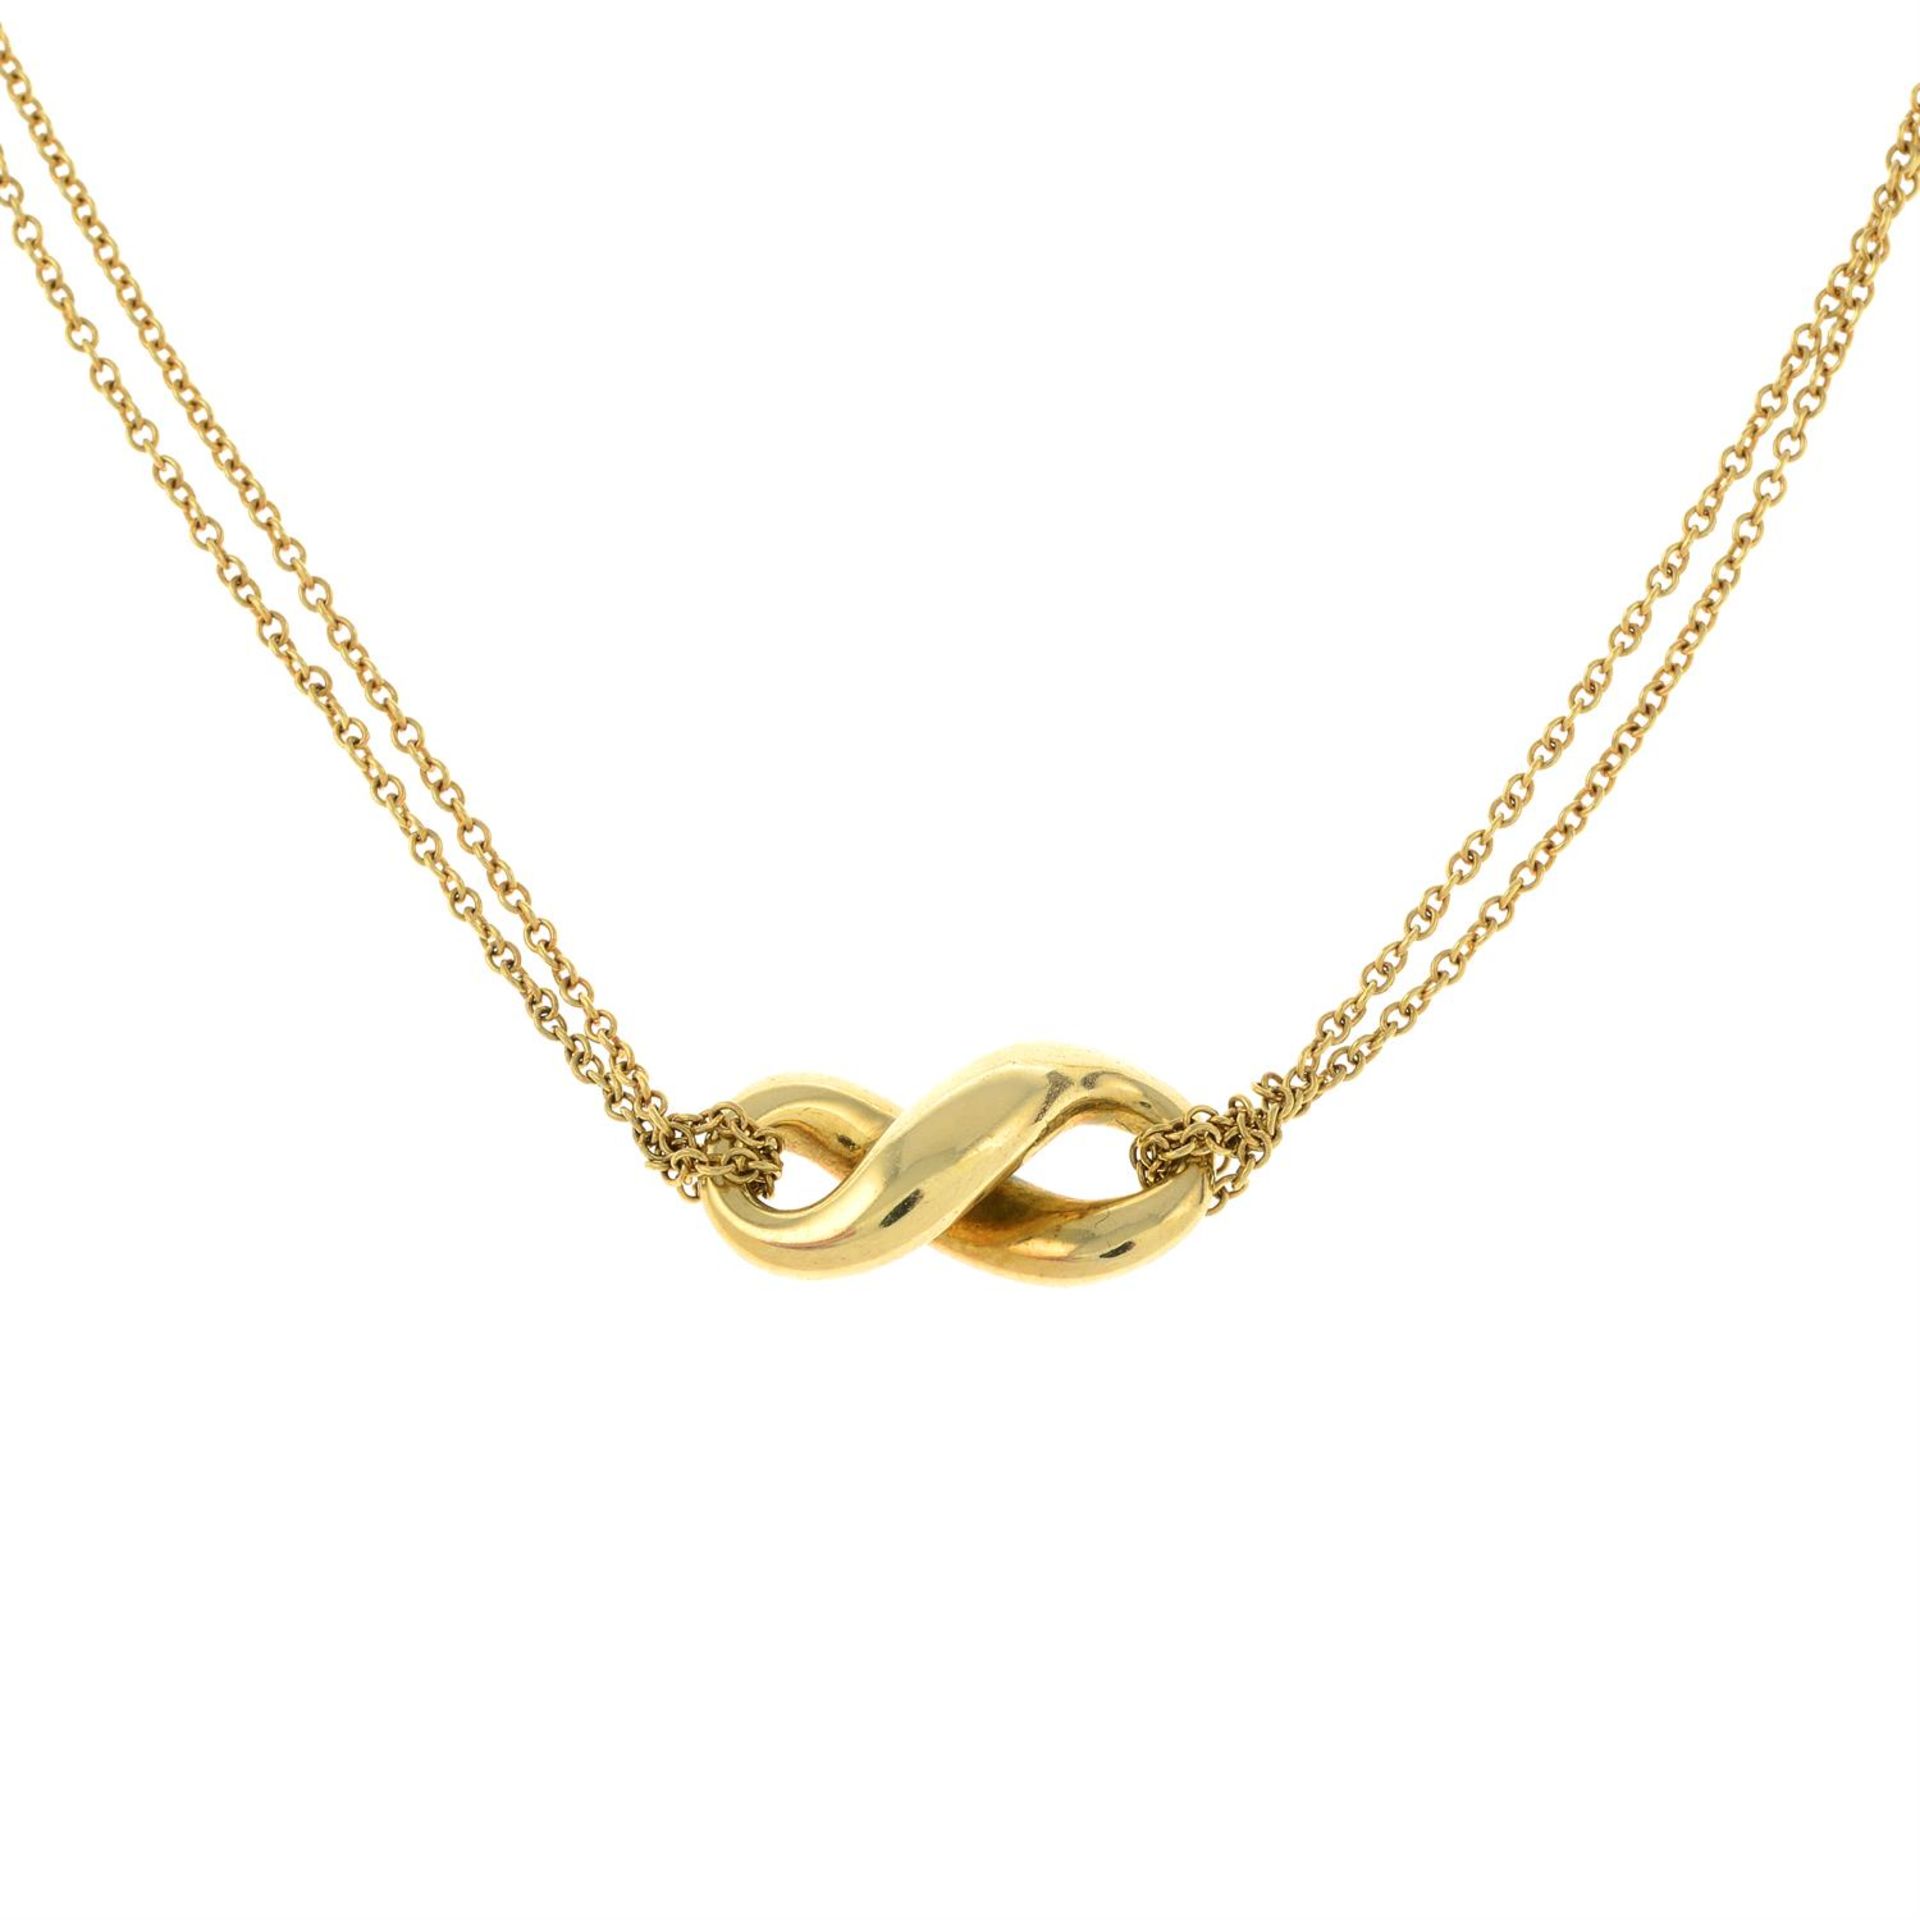 An 'Infinity' necklace, by Tiffany & Co.